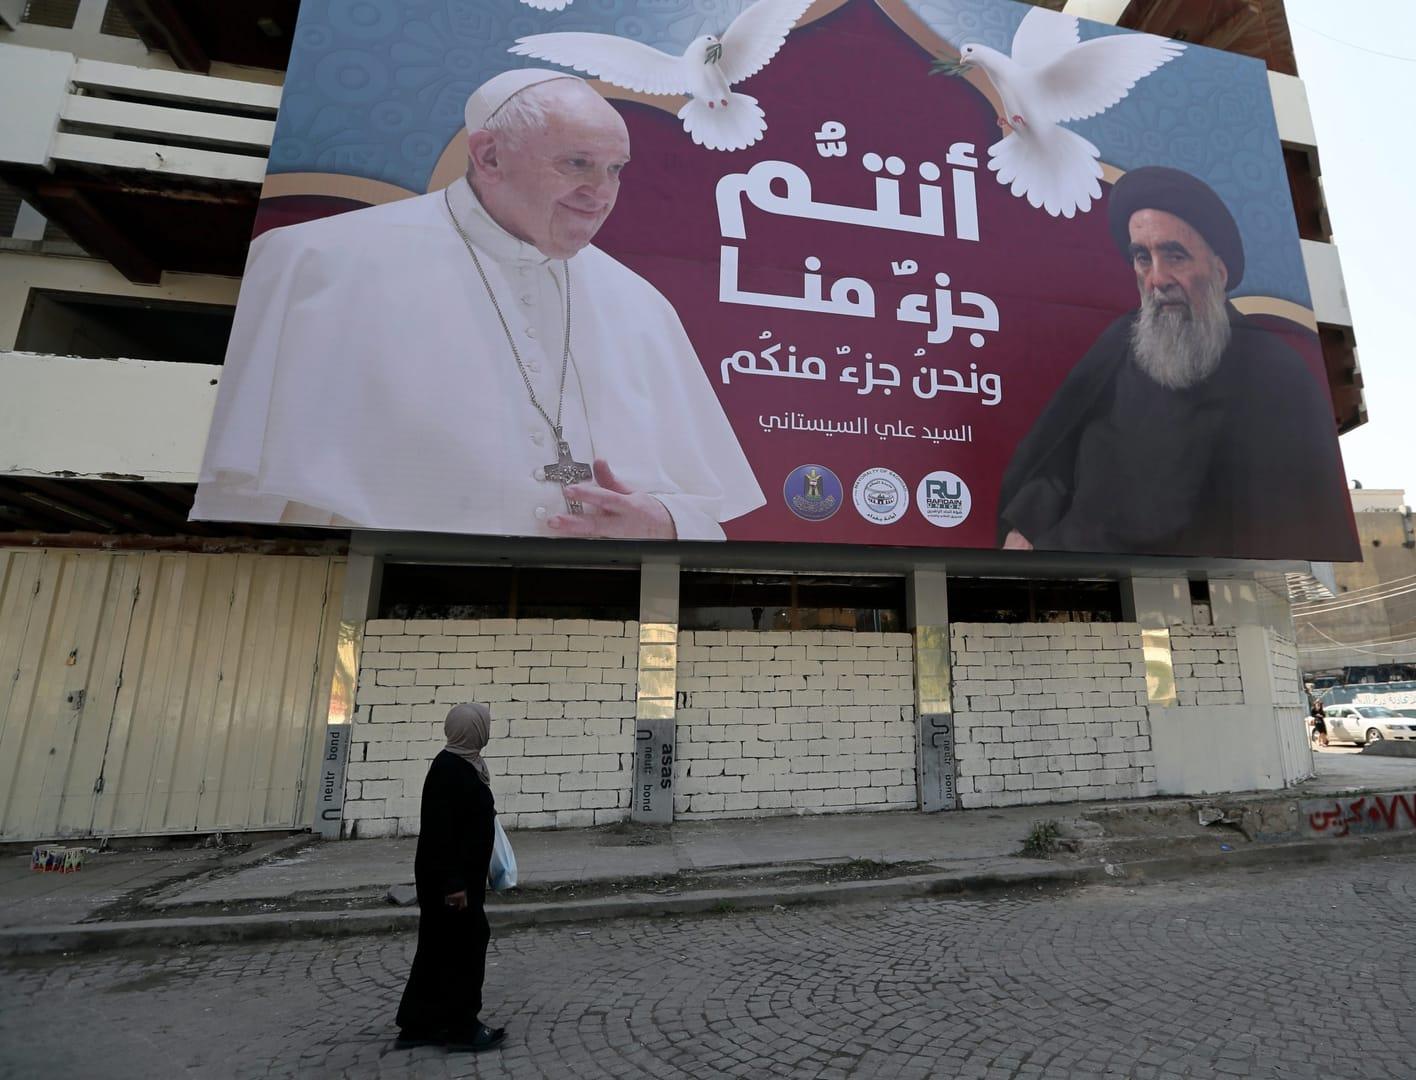 Despite risks, Iraqis want Pope Francis to go ahead with visit